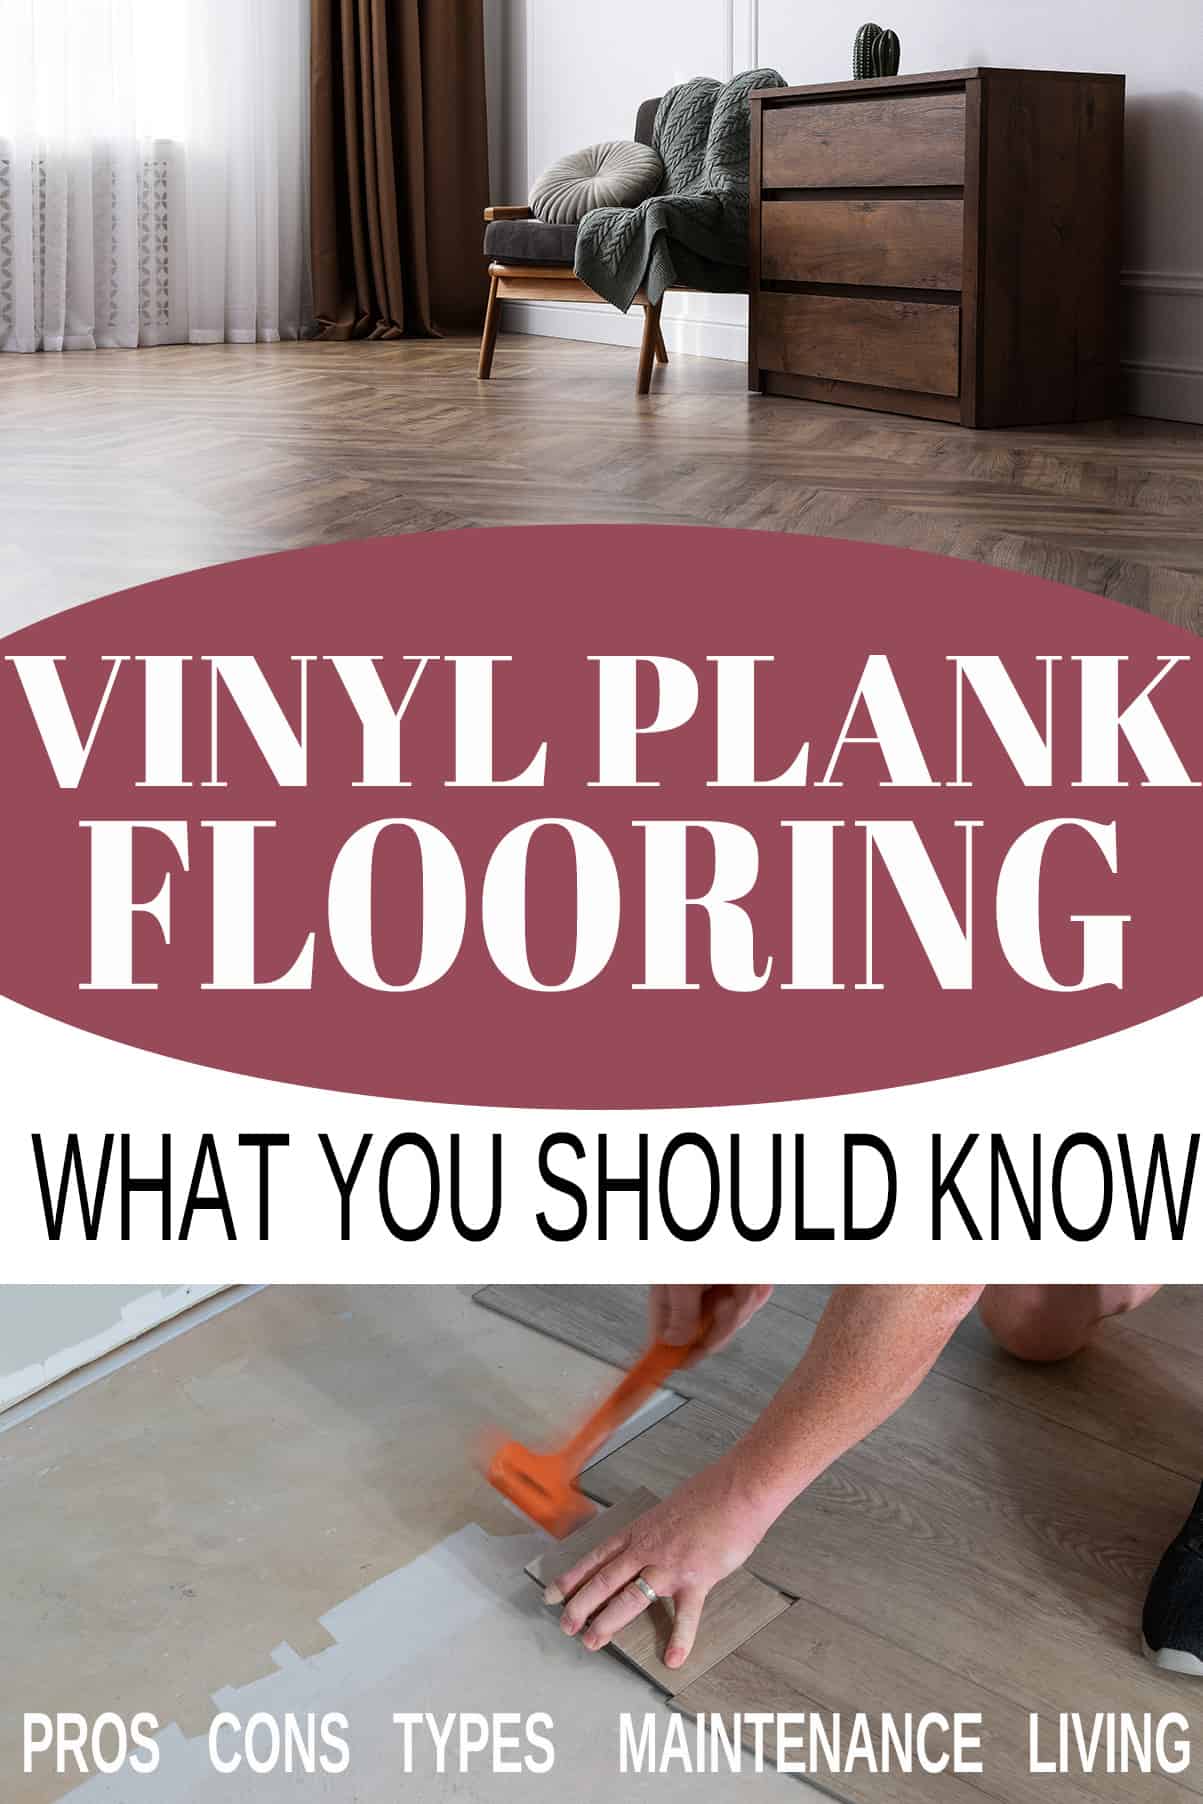 Collage of Luxury vinyl floors with man installing them. Includes post title of what you should know about vinyl plank flooring.